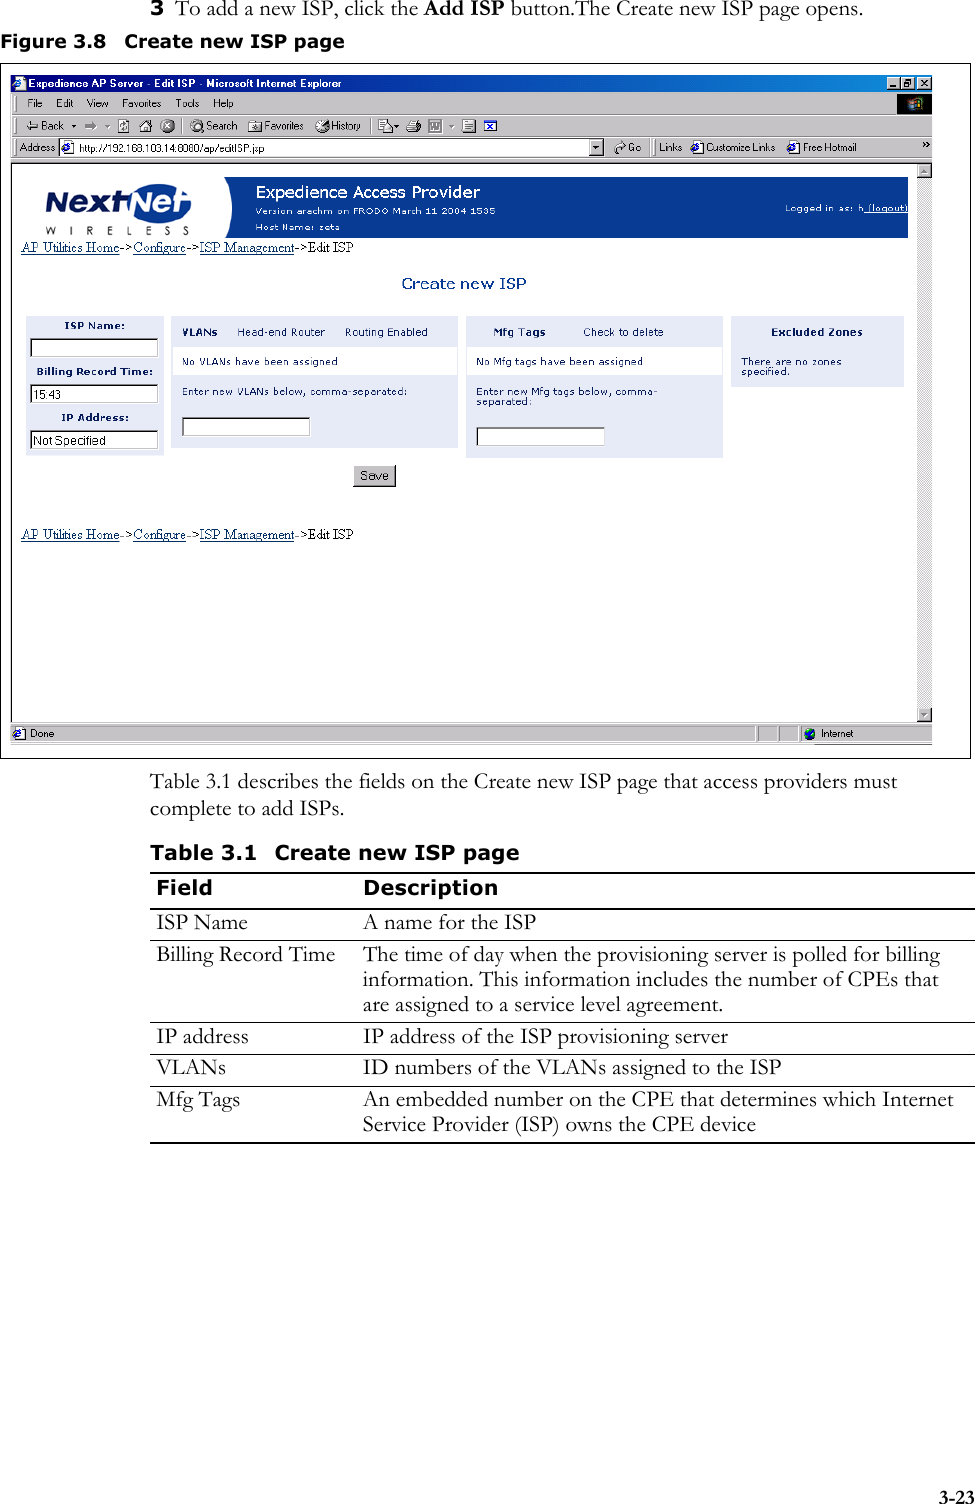 3-233To add a new ISP, click the Add ISP button.The Create new ISP page opens. Table 3.1 describes the fields on the Create new ISP page that access providers must complete to add ISPs.Figure 3.8 Create new ISP pageTable 3.1 Create new ISP pageField DescriptionISP Name A name for the ISPBilling Record Time The time of day when the provisioning server is polled for billing information. This information includes the number of CPEs that are assigned to a service level agreement.IP address IP address of the ISP provisioning serverVLANs ID numbers of the VLANs assigned to the ISPMfg Tags An embedded number on the CPE that determines which Internet Service Provider (ISP) owns the CPE device